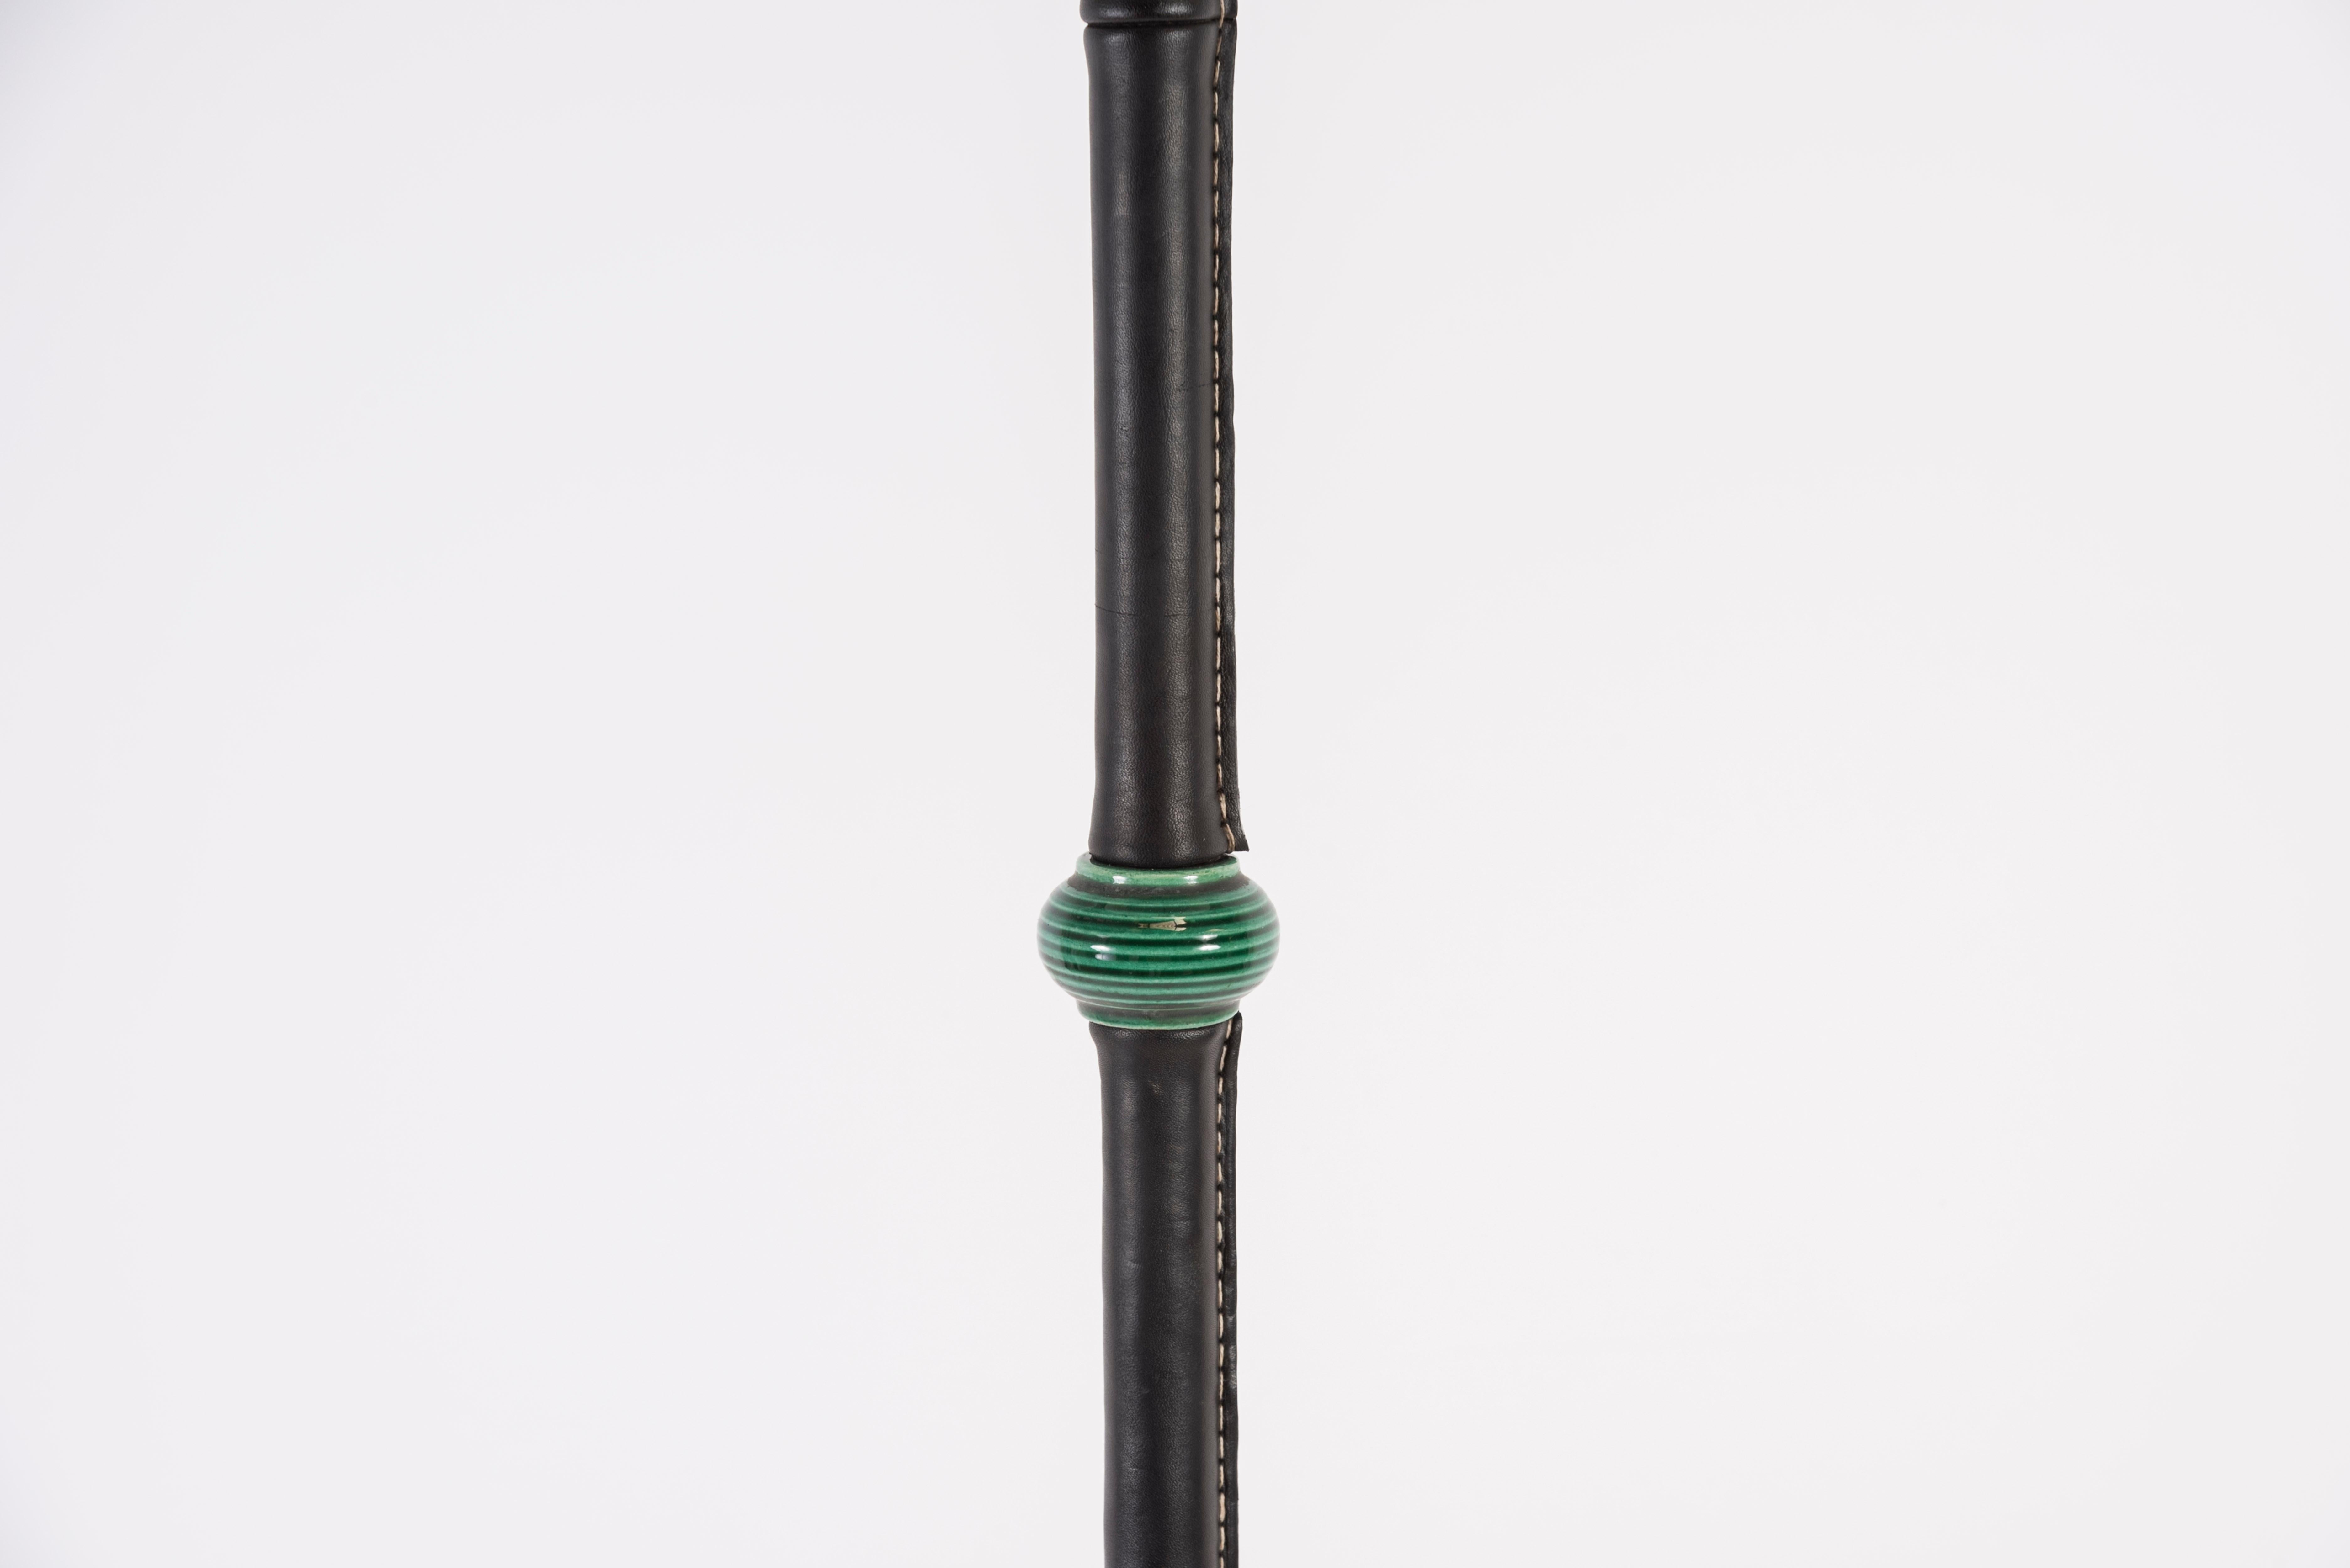 1950's stitched leather floor lamp by Jacques Adnet
With green Ceramic By Maurice Savin
France.